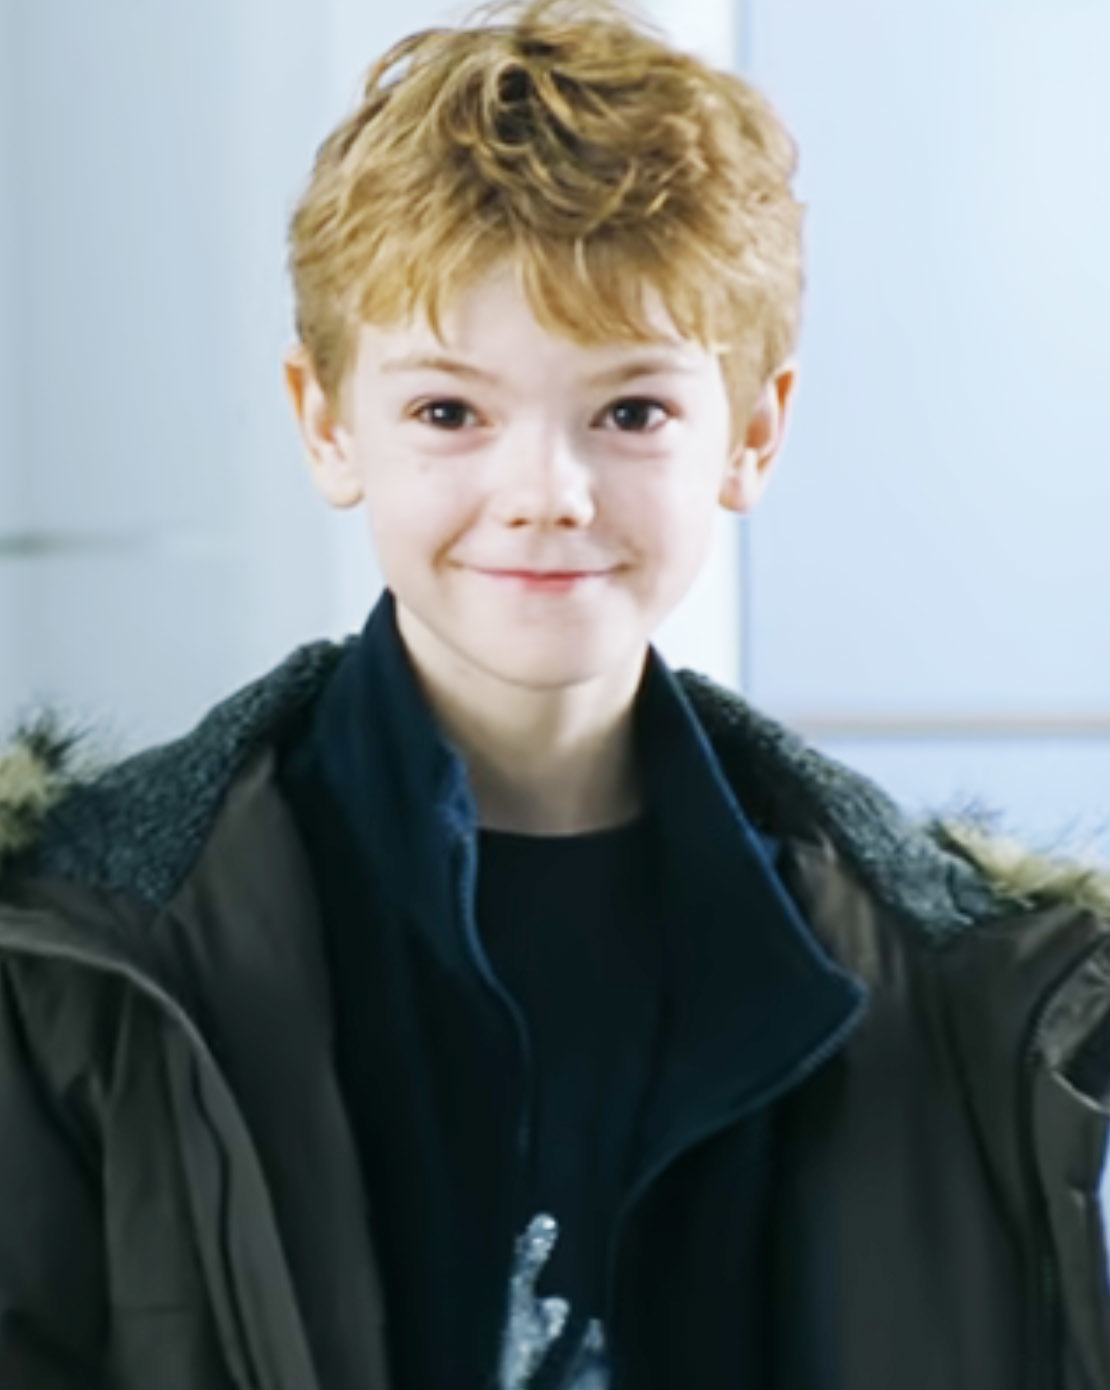 Close-up of Thomas smiling and wearing a jacket